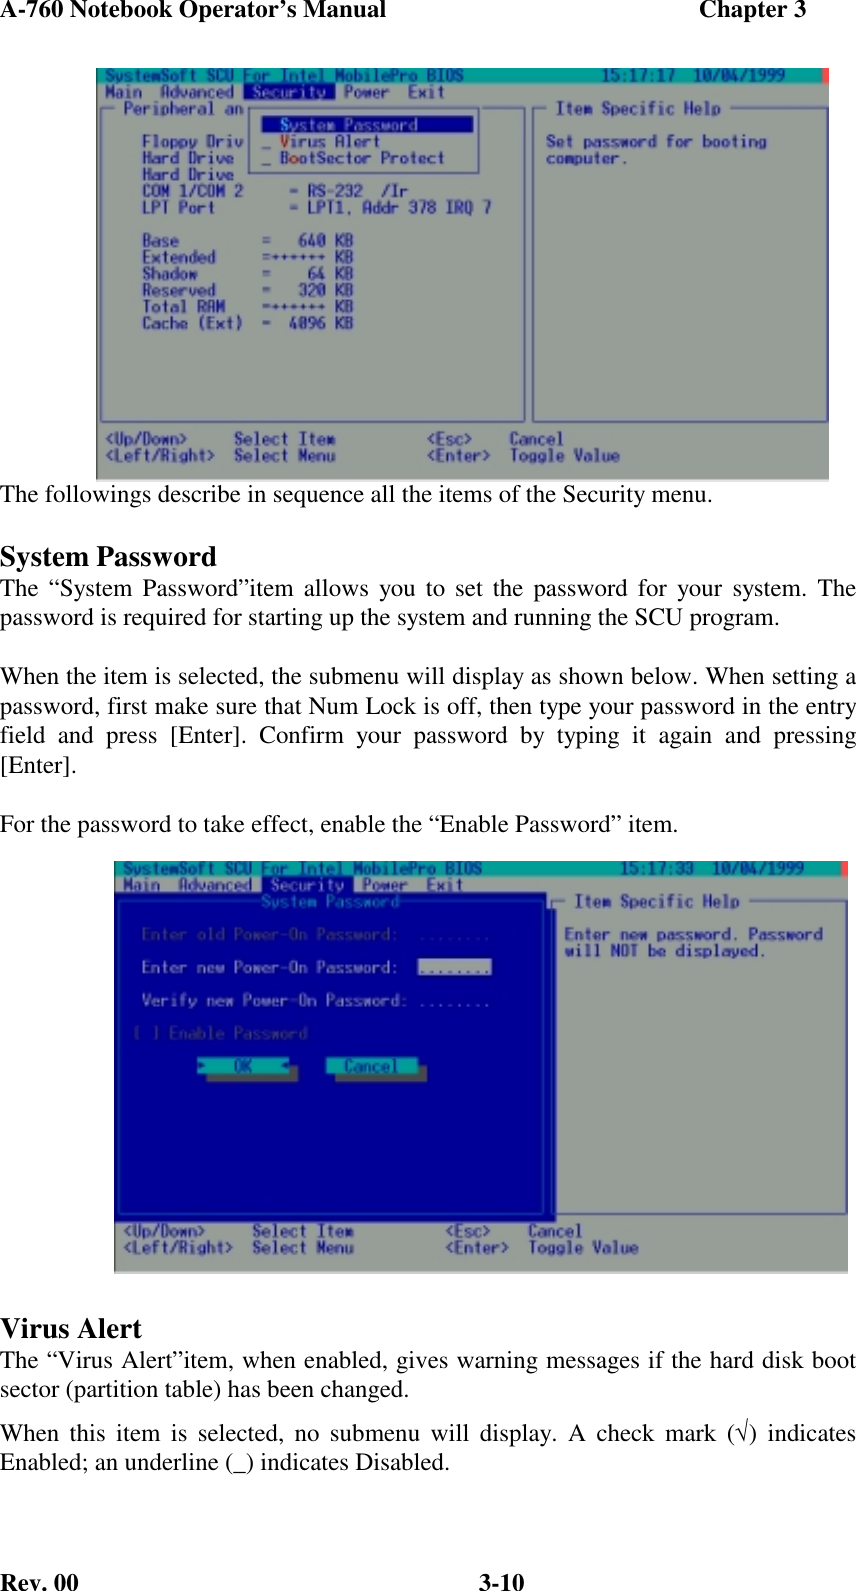 A-760 Notebook Operator’s Manual                                                  Chapter 3Rev. 00 3-10The followings describe in sequence all the items of the Security menu.System PasswordThe “System Password”item allows you to set the password for your system. Thepassword is required for starting up the system and running the SCU program.When the item is selected, the submenu will display as shown below. When setting apassword, first make sure that Num Lock is off, then type your password in the entryfield and press [Enter]. Confirm your password by typing it again and pressing[Enter].For the password to take effect, enable the “Enable Password” item.Virus AlertThe “Virus Alert”item, when enabled, gives warning messages if the hard disk bootsector (partition table) has been changed.When this item is selected, no submenu will display. A check mark (√) indicatesEnabled; an underline (_) indicates Disabled.